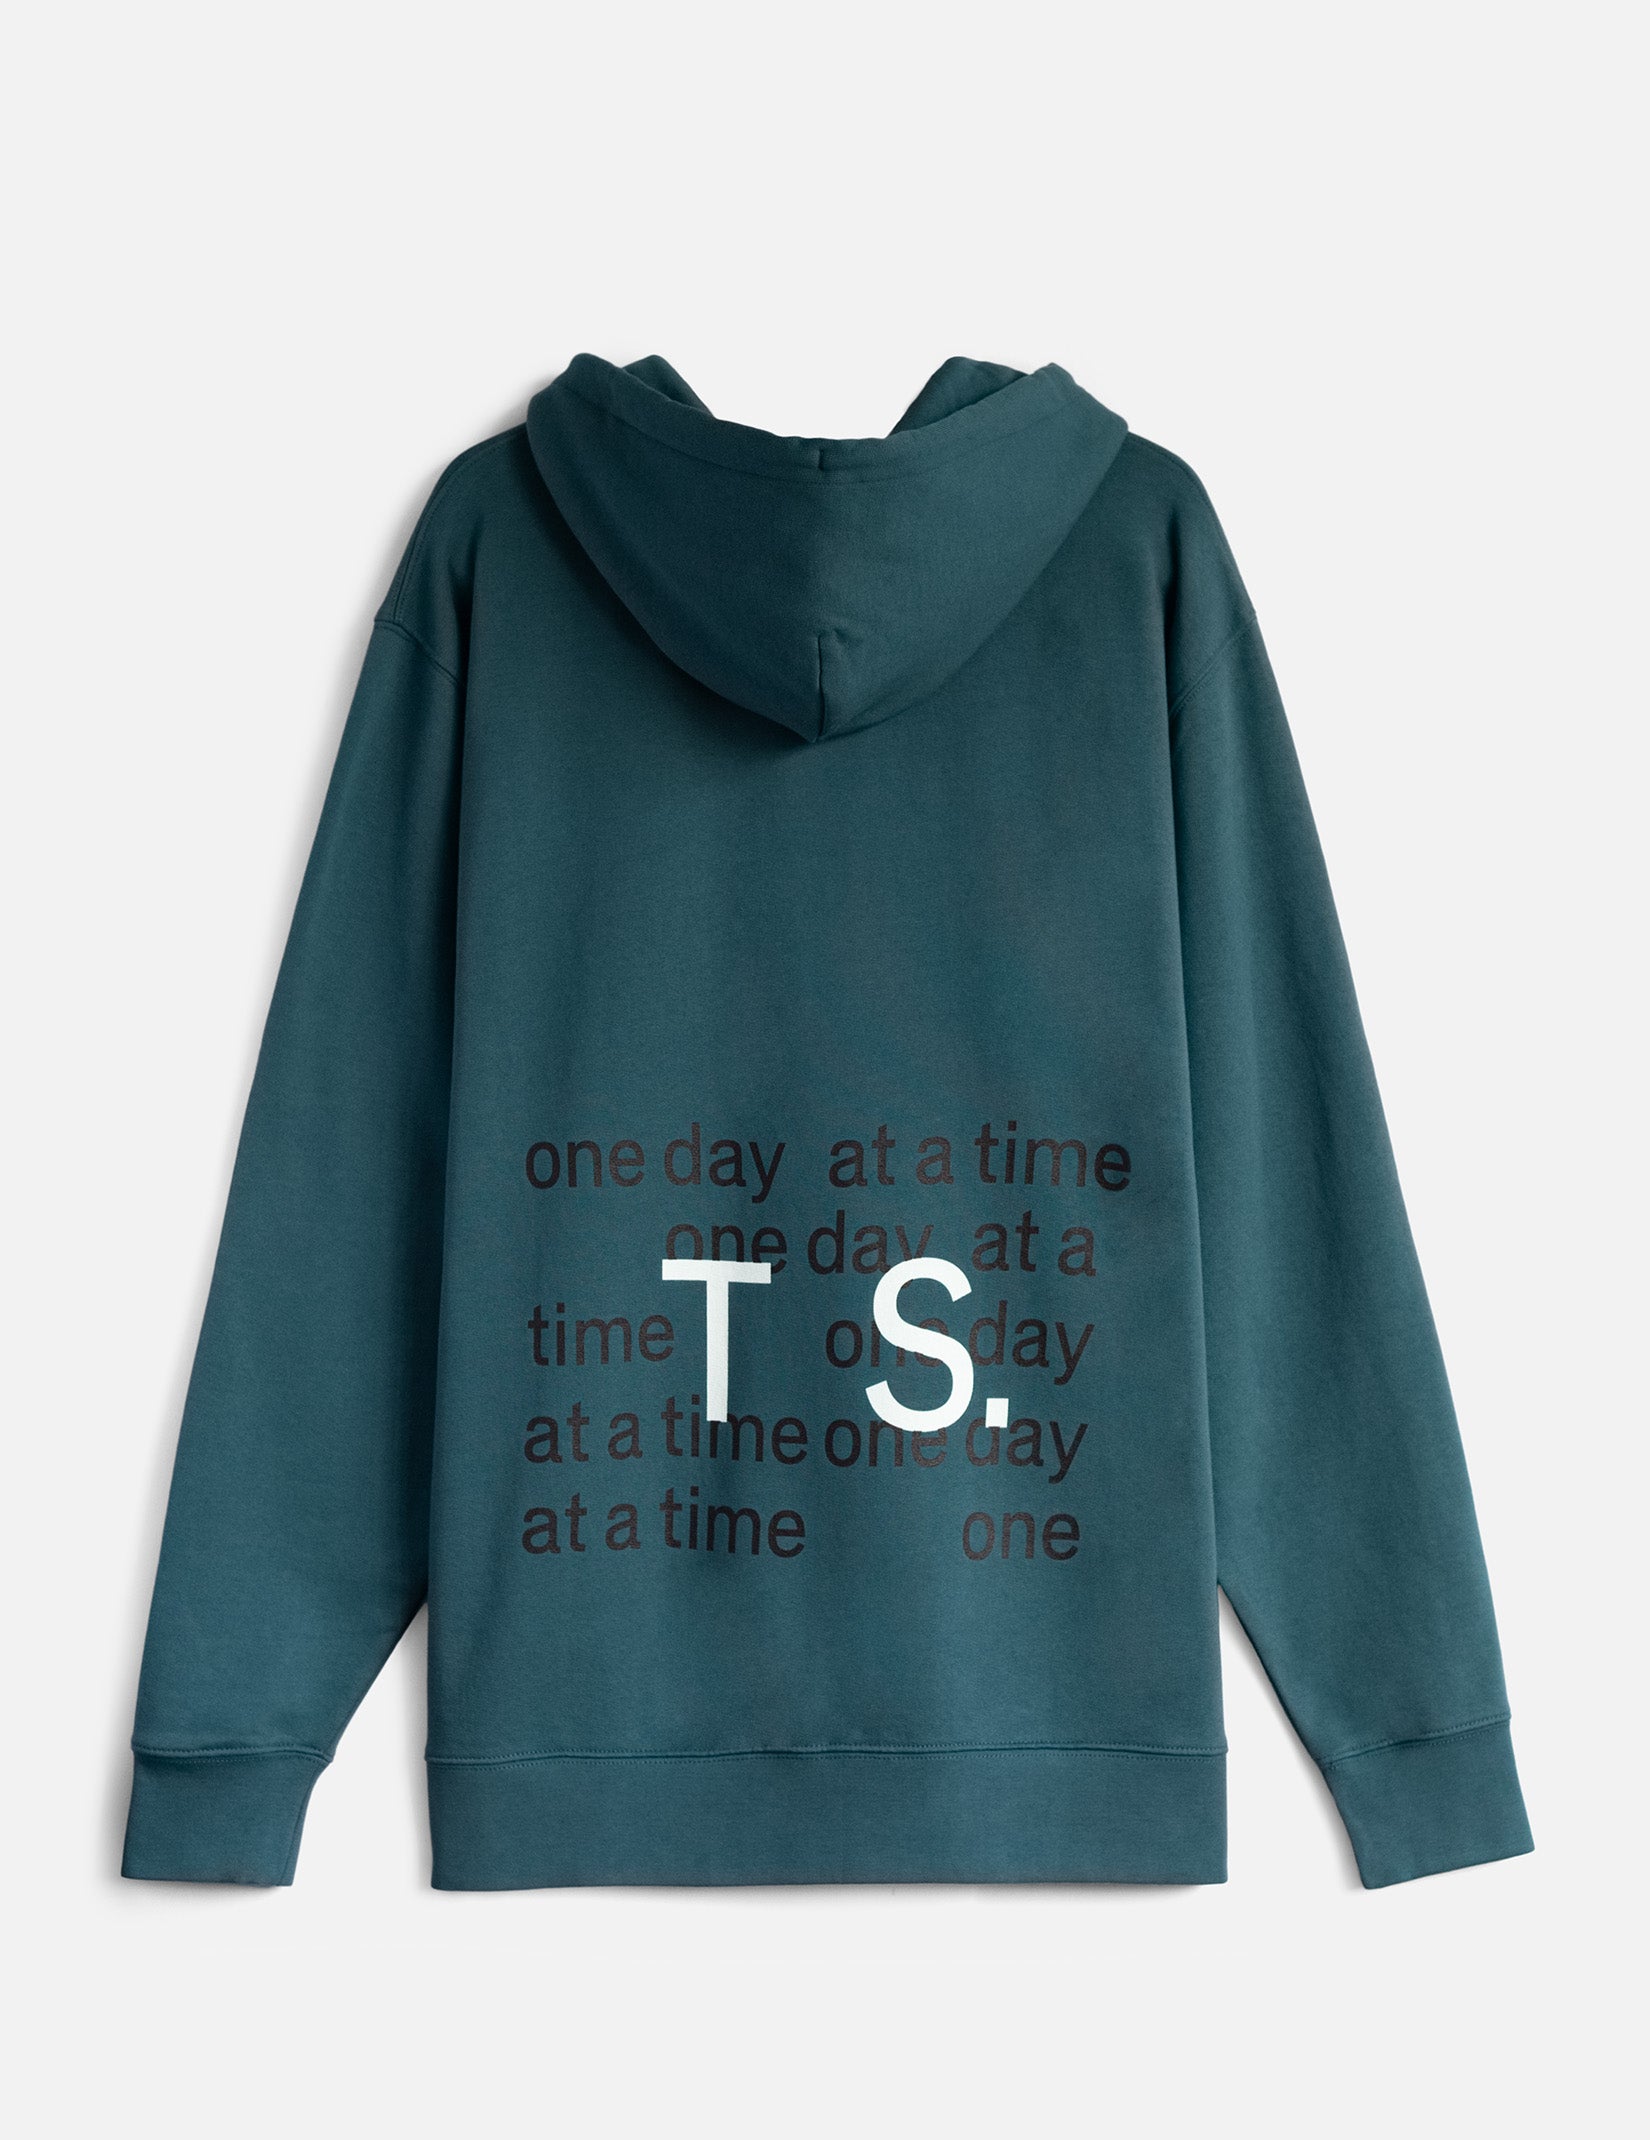 A teal colour hoodie viewed from the back, with a black print that says ‘one day at a time’ repeatedly. On top of this the letters TS (large, in white) are overlaid.